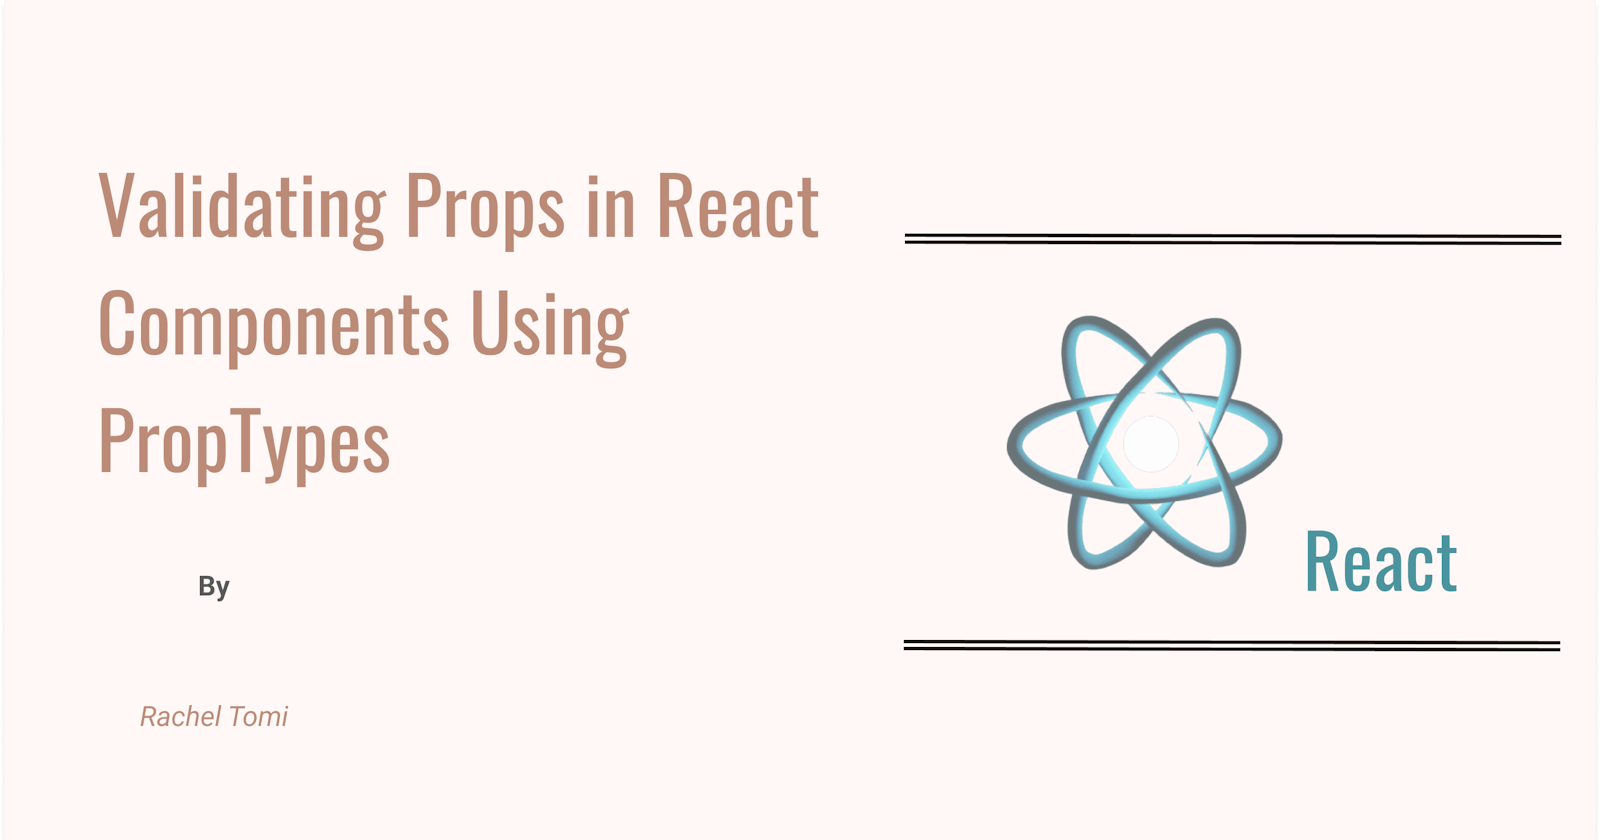 Validating Props in React Components Using PropTypes